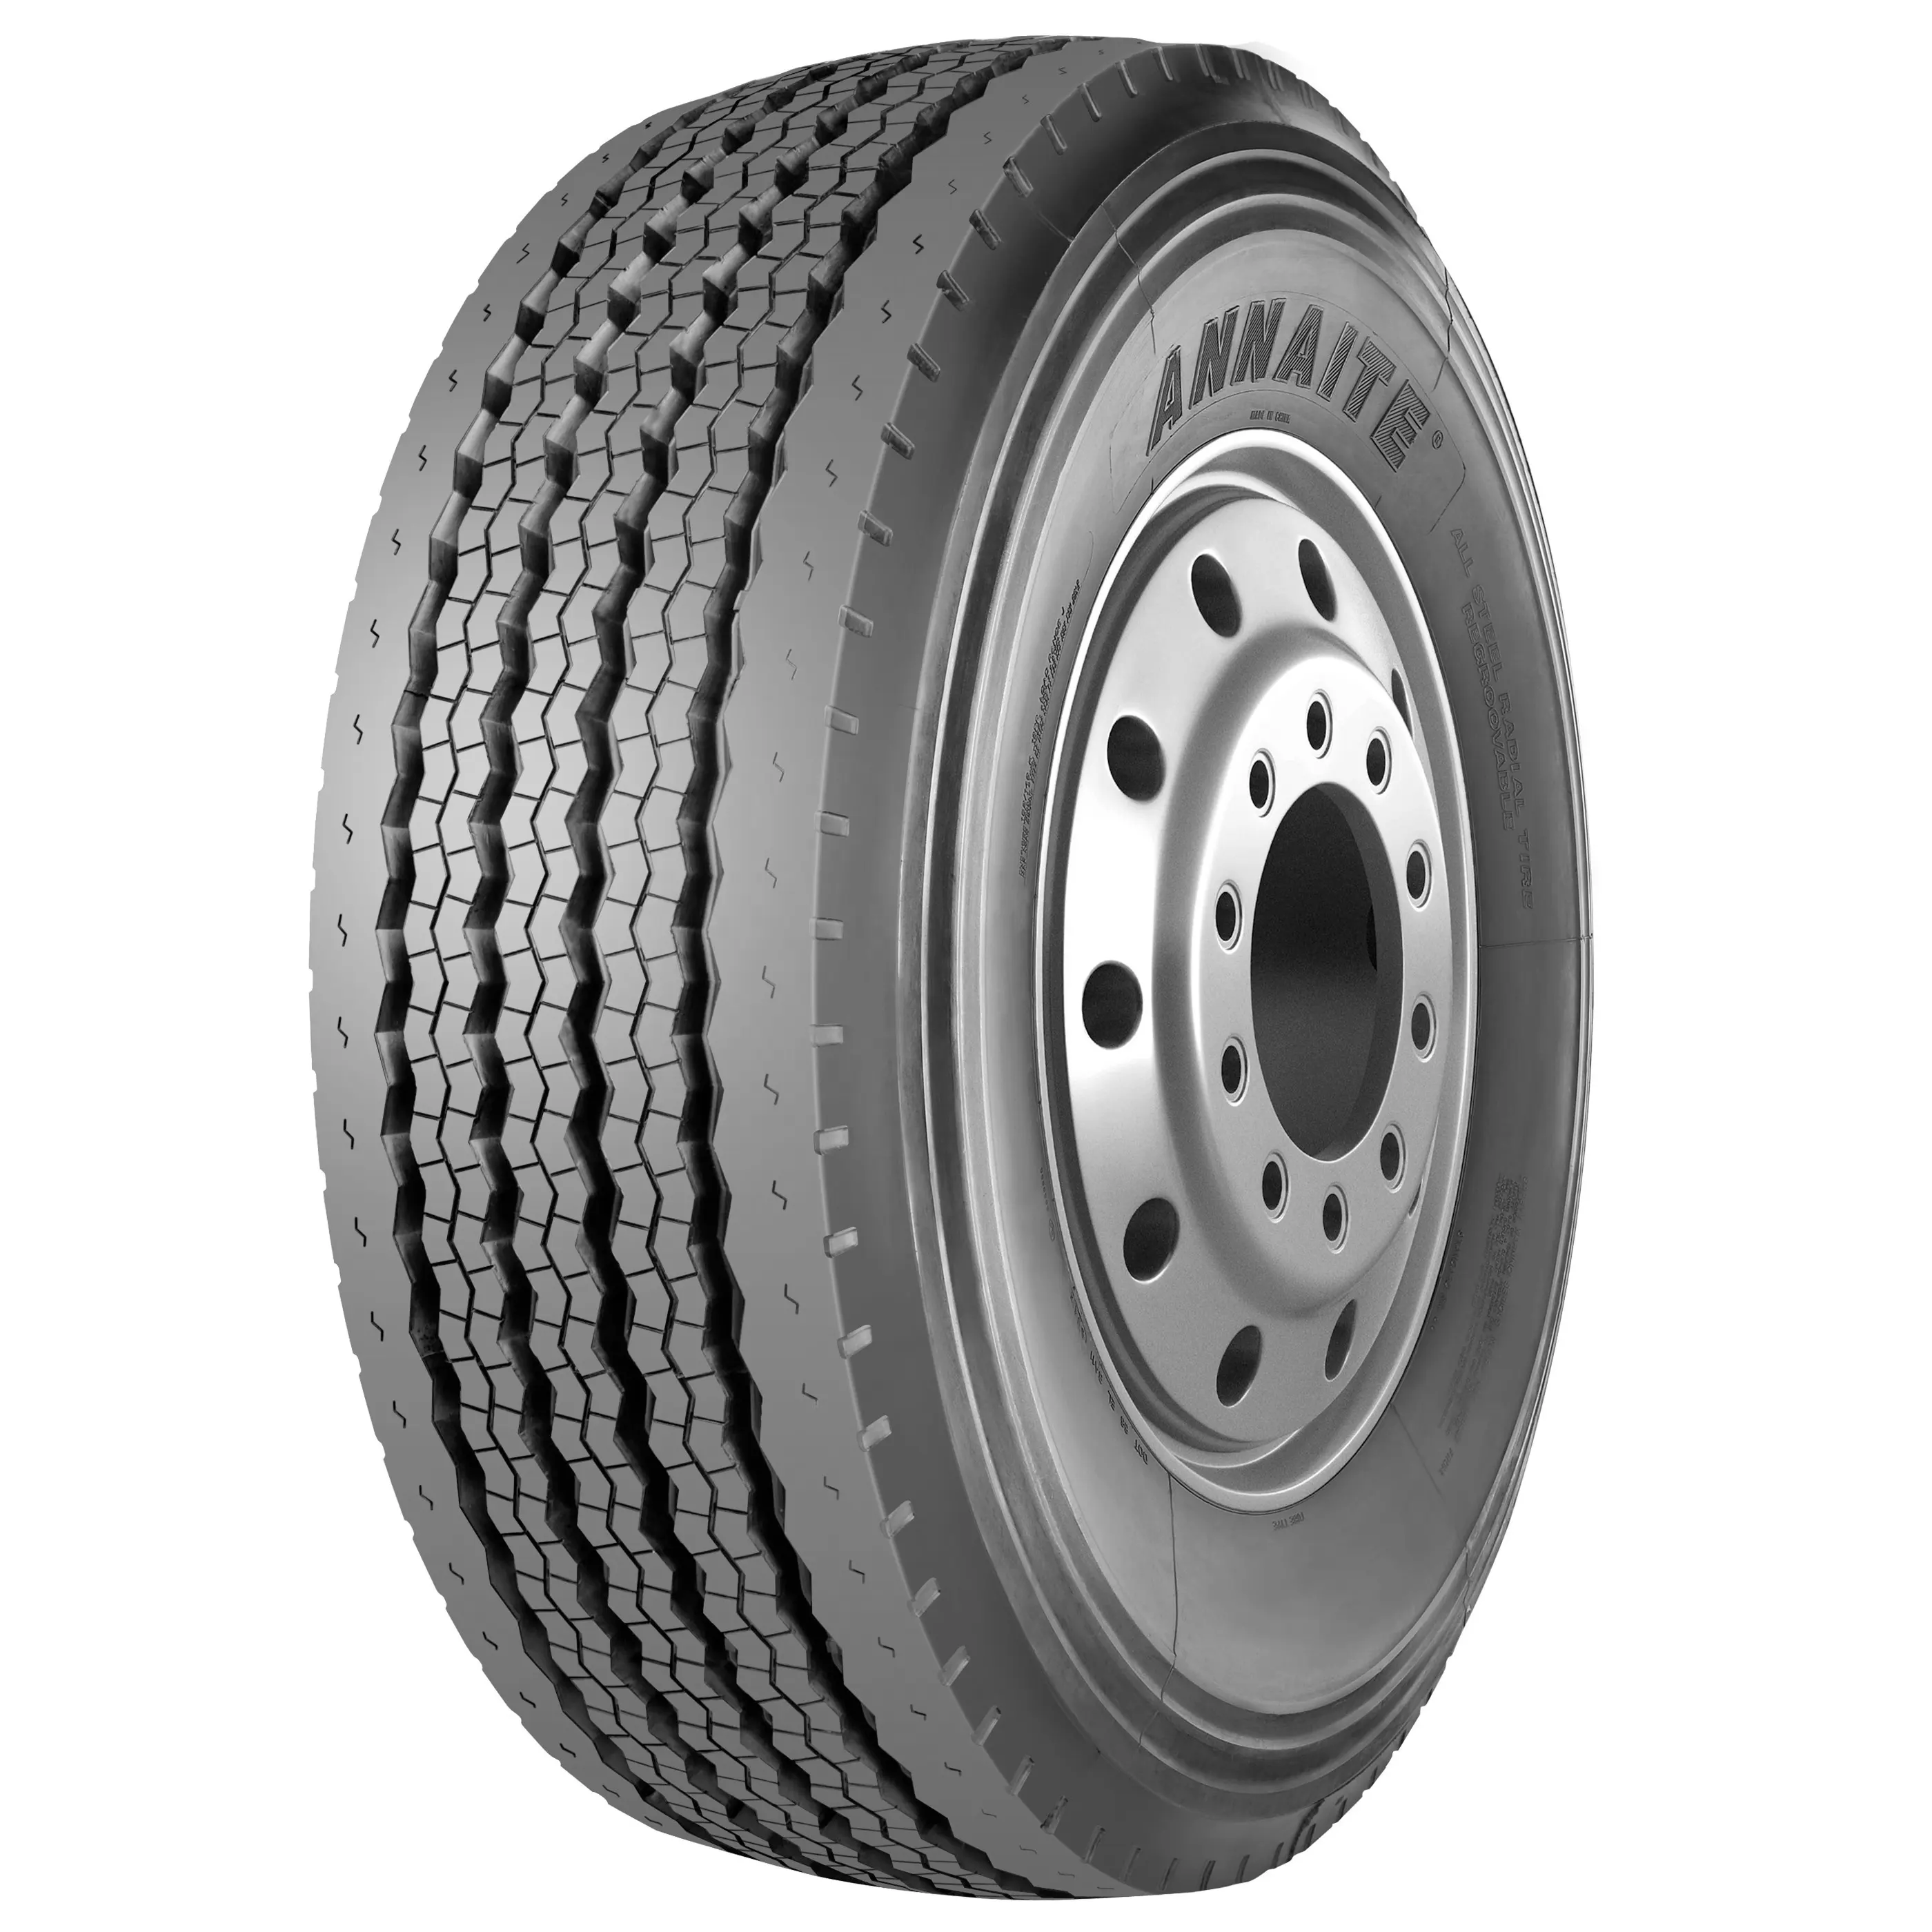 annaite amberstone brand truck tyres 385/65R22.5 385 65 22.5 tires heavy duty load